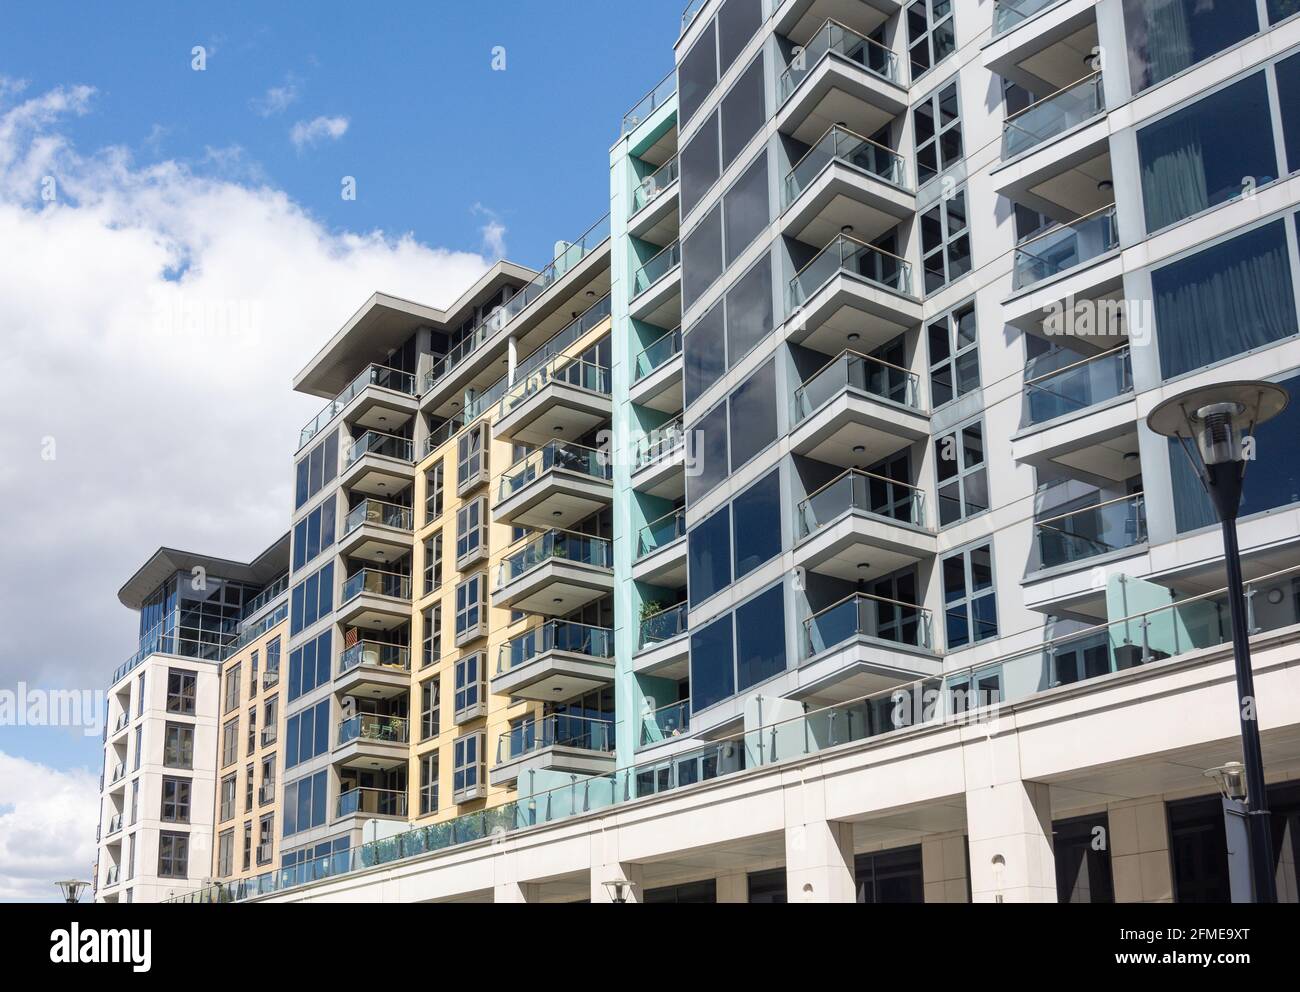 Appartamento a Imperial Wharf, Chelsea Harbour, Sands End, Borough of Hammersmith e Fulham, Greater London, England, Regno Unito Foto Stock